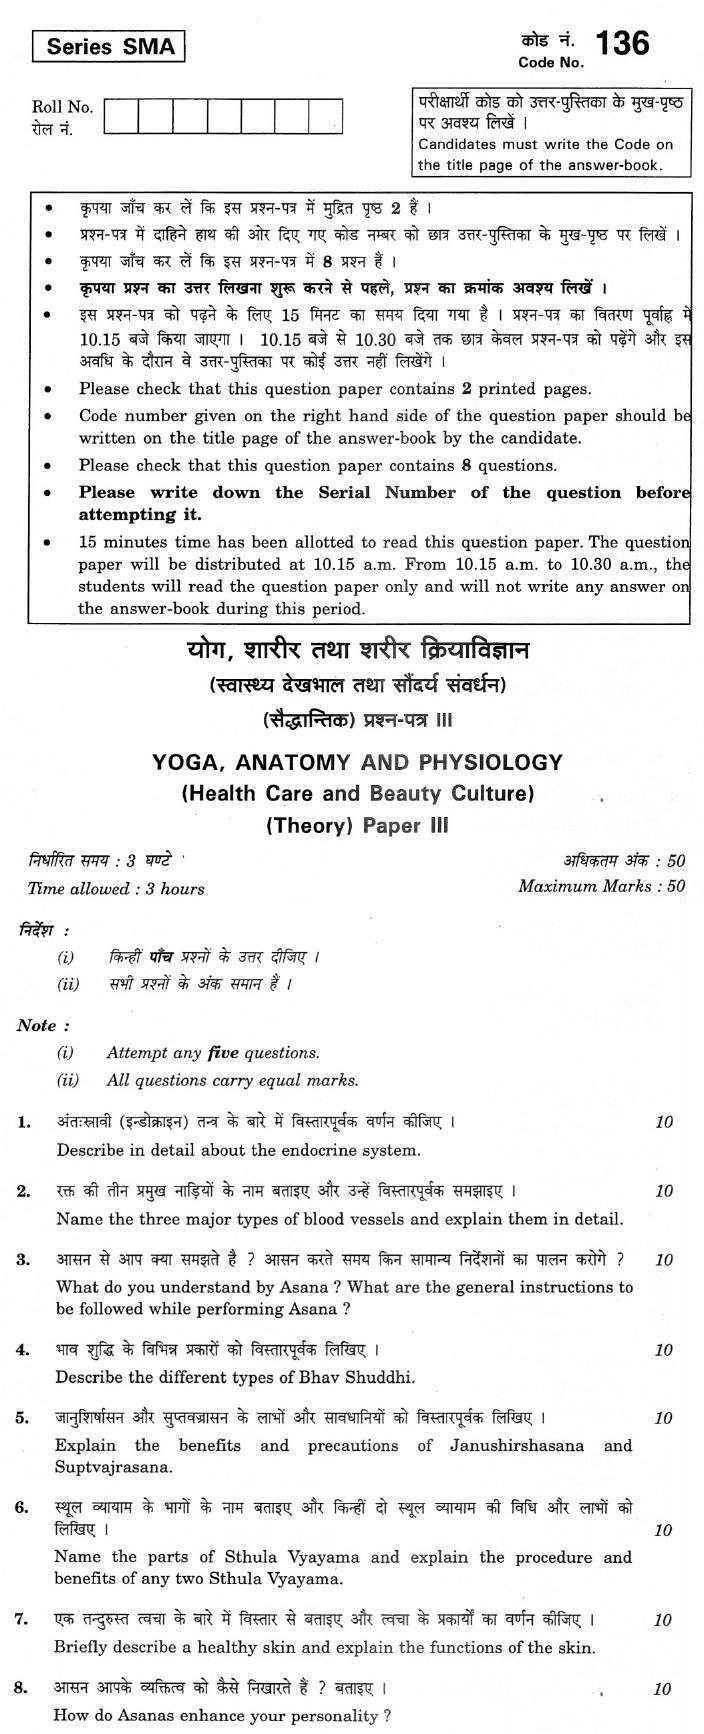 CBSE Class XII Previous Year Question Paper 2012 Yoga, Anatomy and Physiology